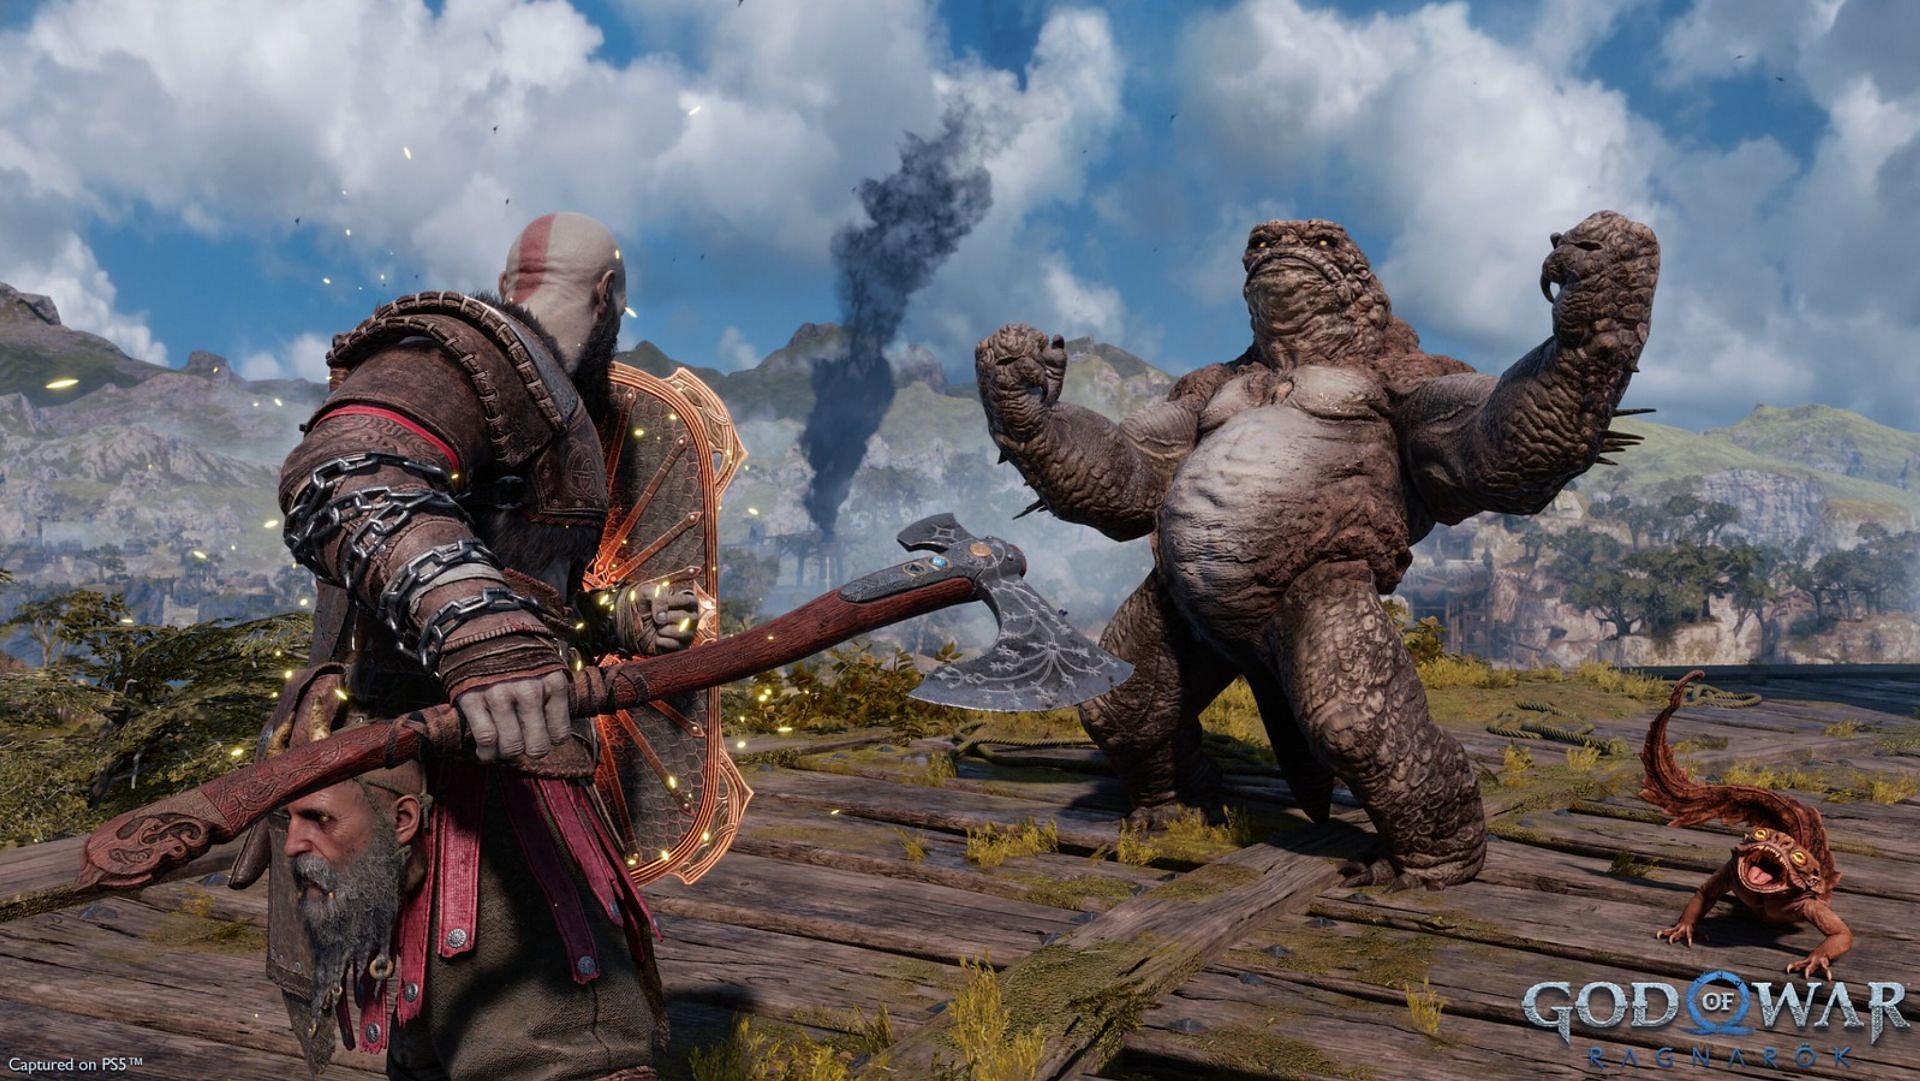 The Bergsra &quot;Mother&quot; accompanied by many of the tiny &quot;Wretch&quot; enemies can get overwhelming in the initial stretches of God of War Ragnarok (Image via PlayStation)